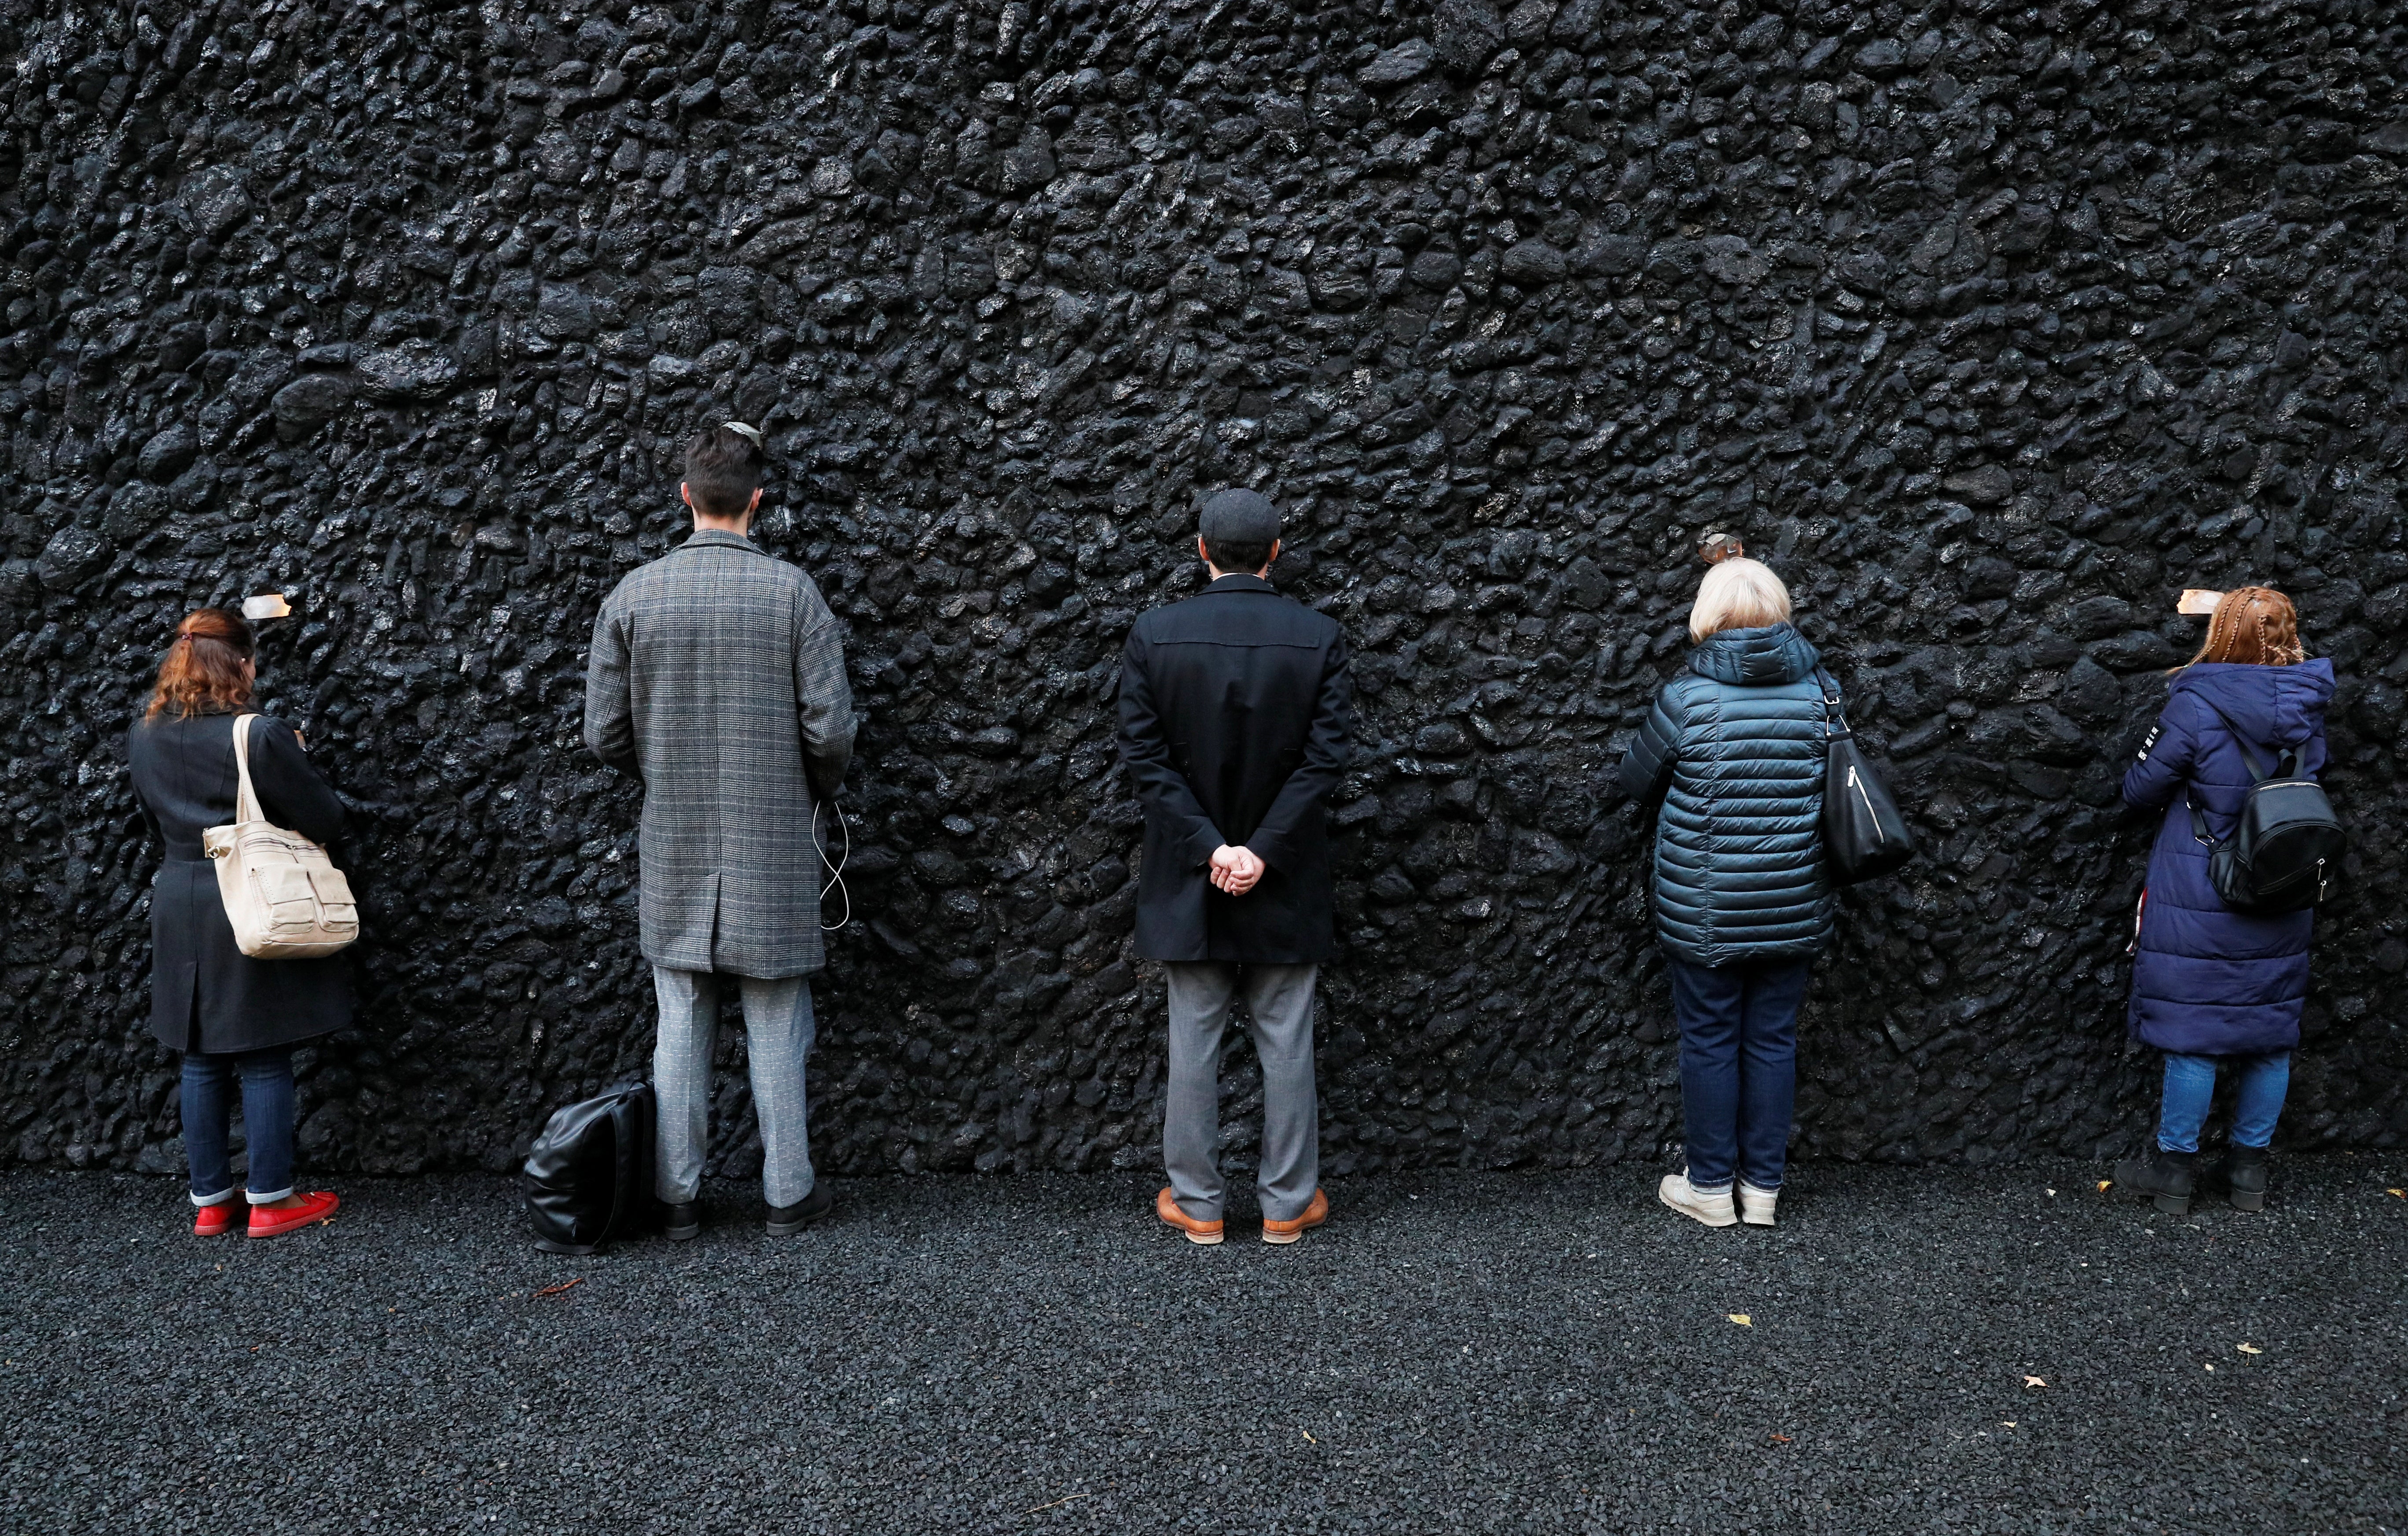 People take part in a performance by artist Marina Abramovic next to her artwork ‘Crystal Wall of Crying’ at Babyn Yar